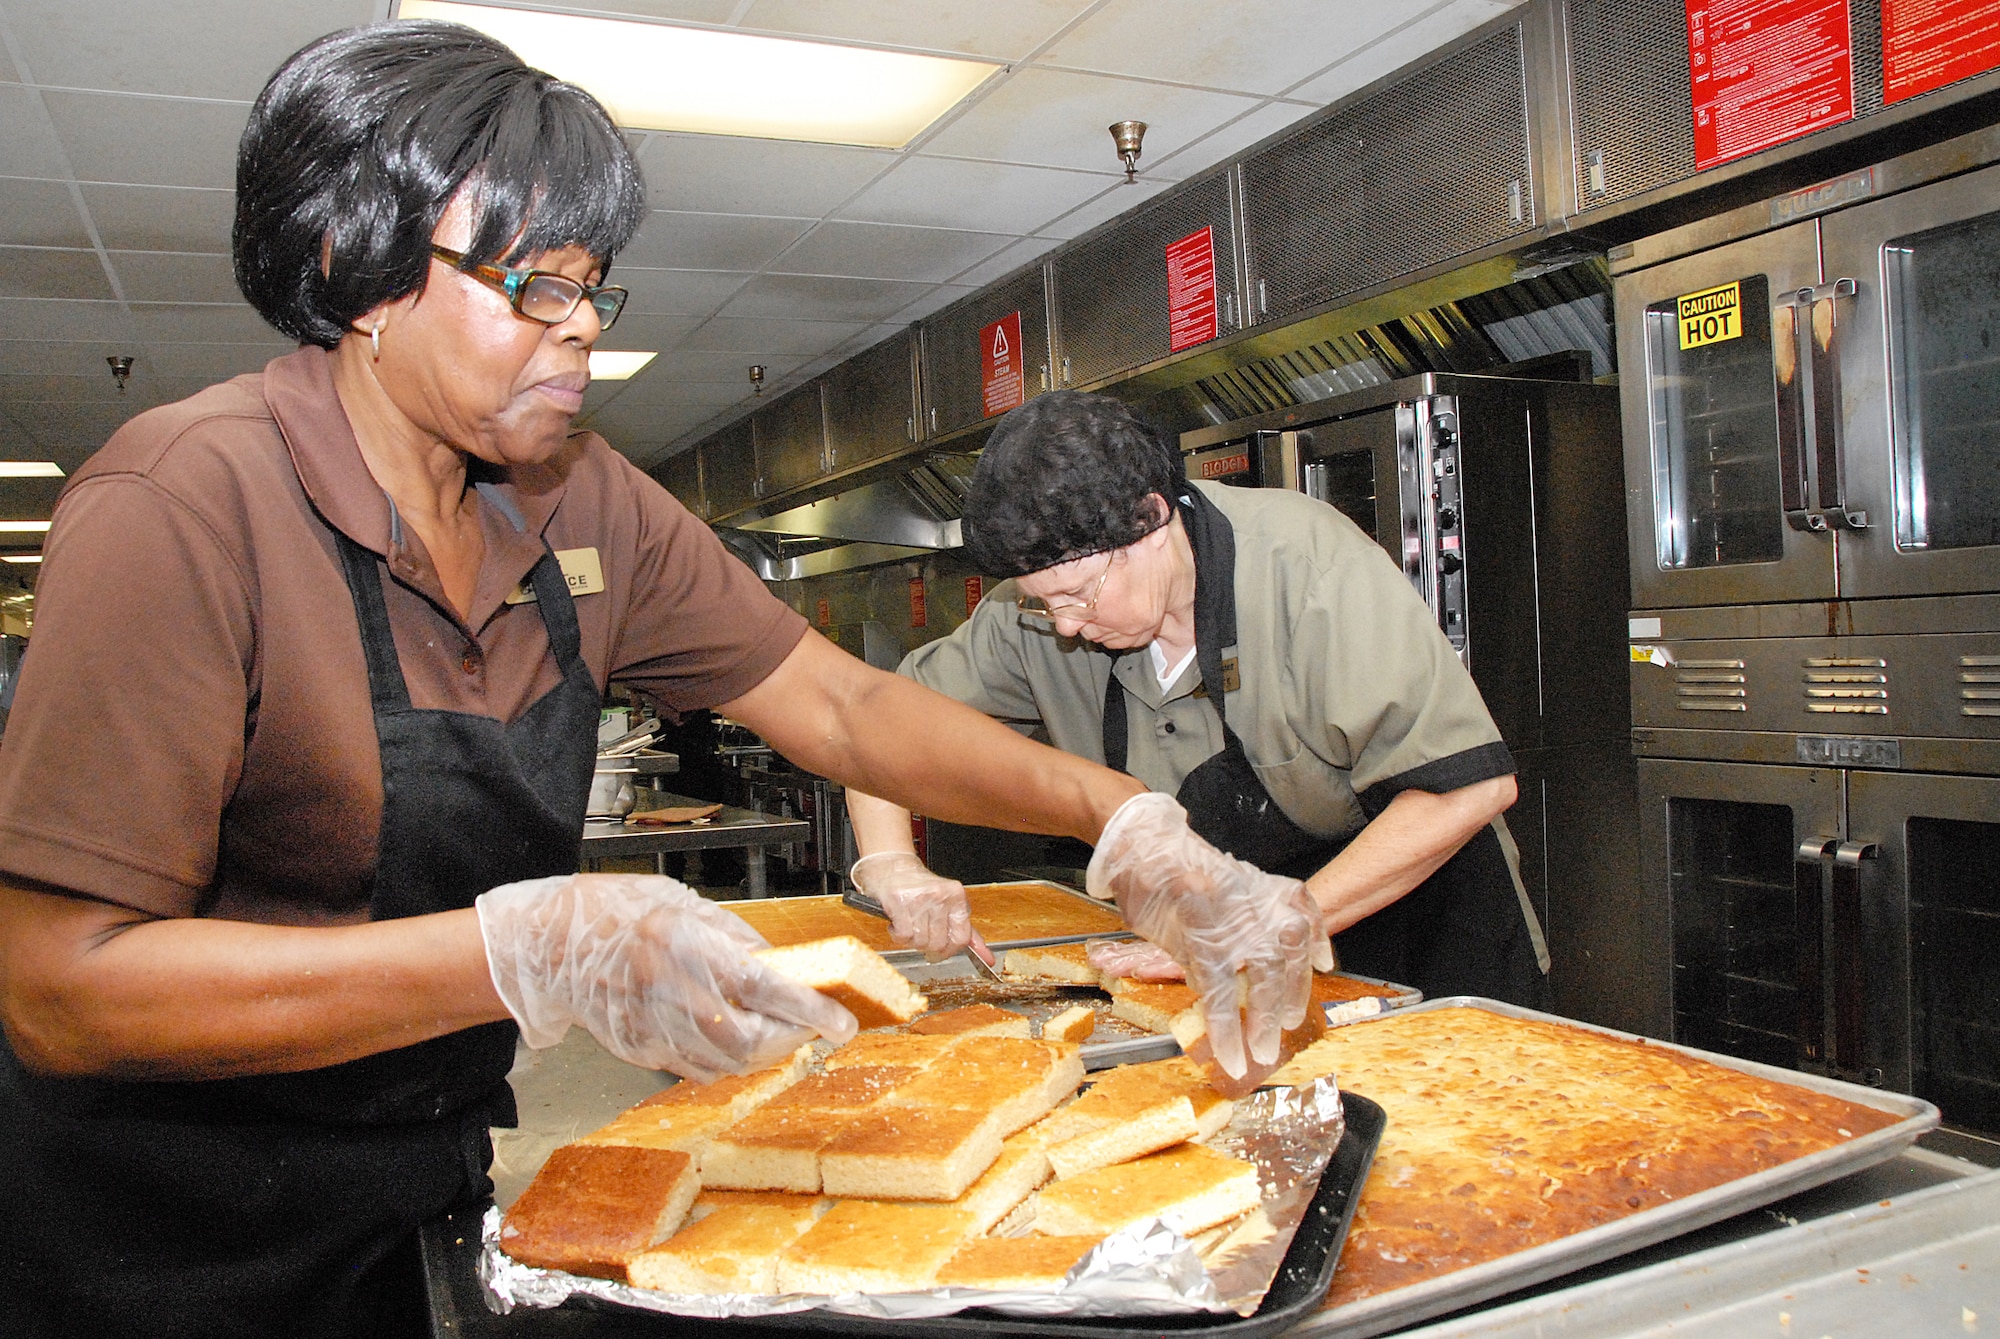 Liz Simmons and Alice Foster,food service workers, cut pans of cornbread into individual servings. (U. S. Air Force photo/Misuzu Allen)